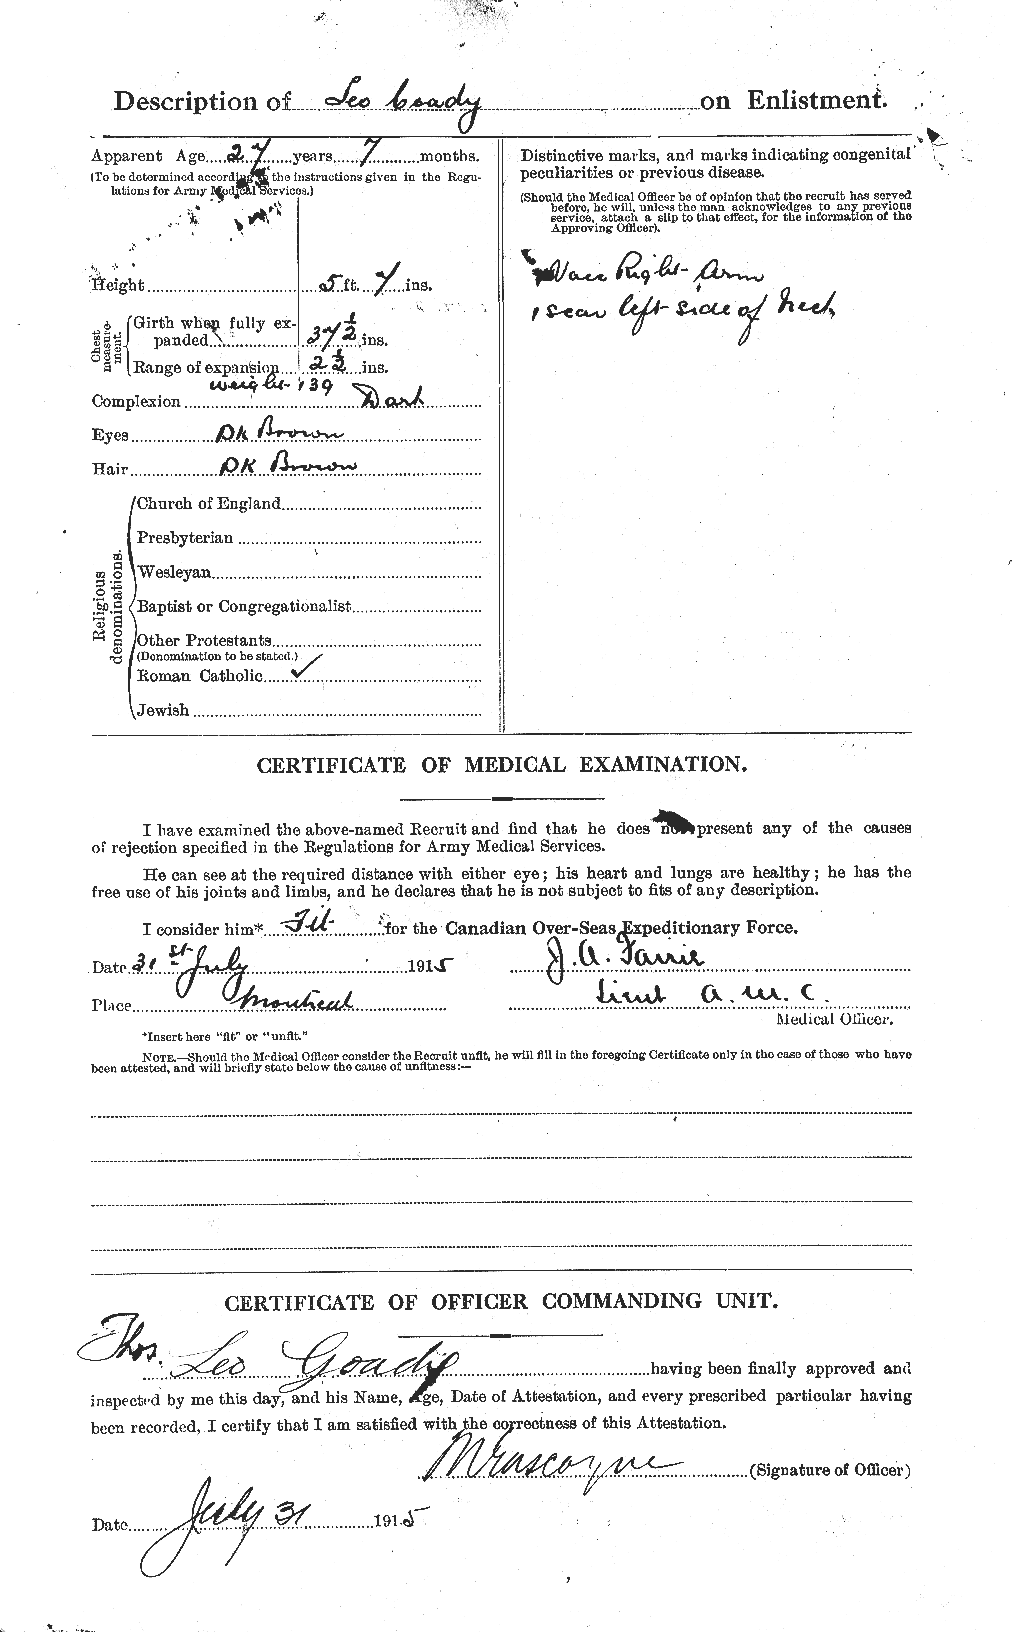 Personnel Records of the First World War - CEF 029319b